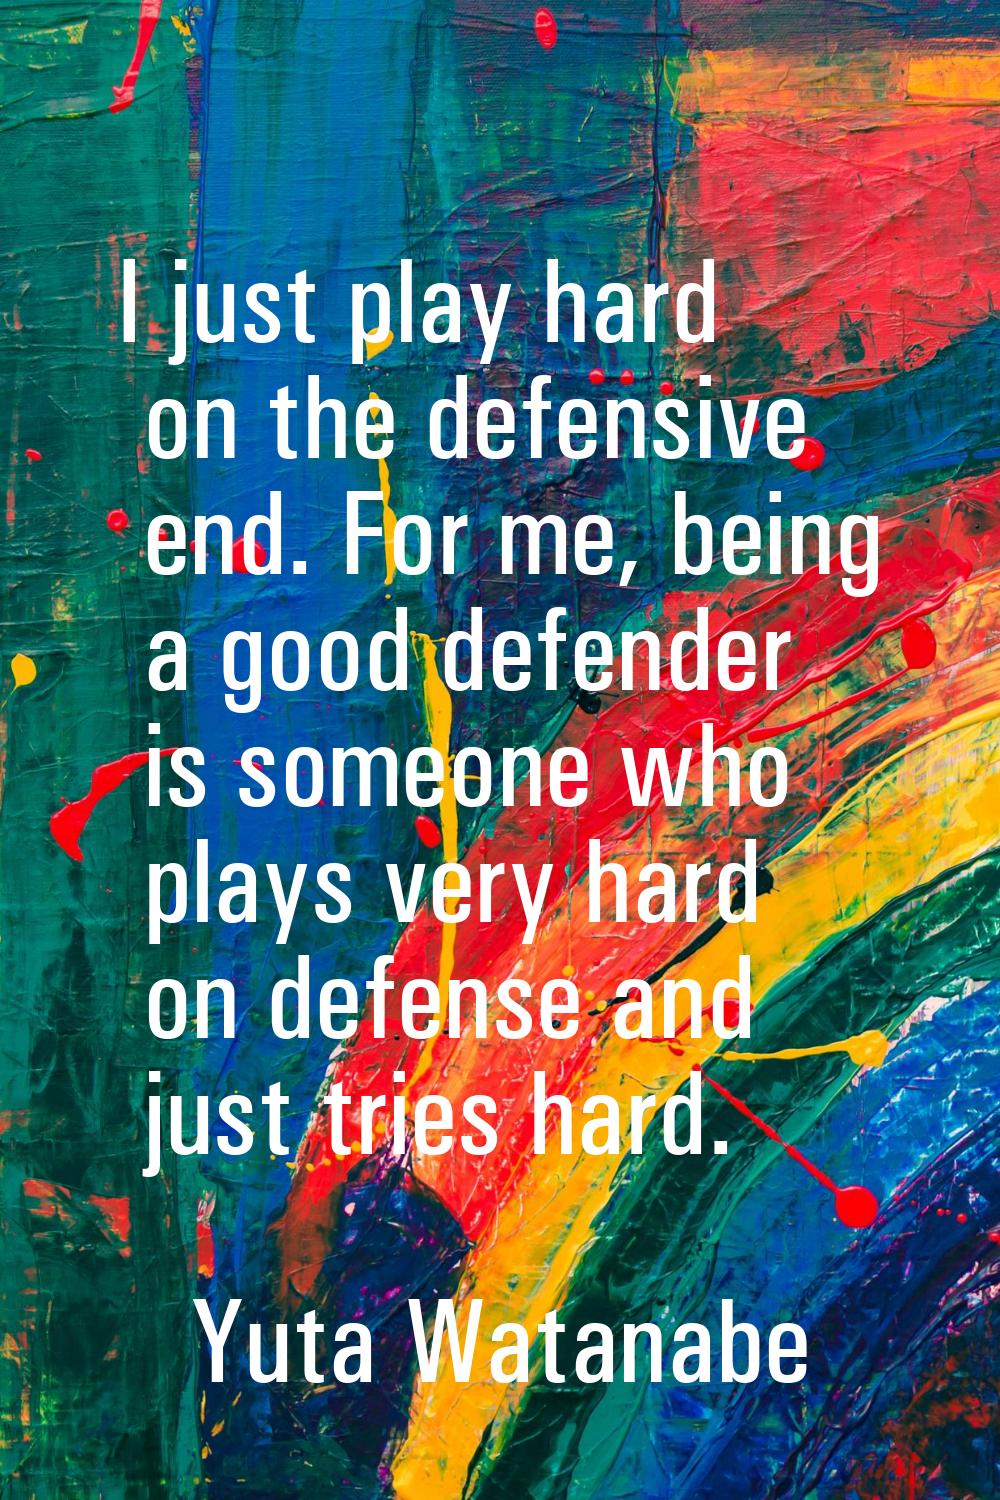 I just play hard on the defensive end. For me, being a good defender is someone who plays very hard